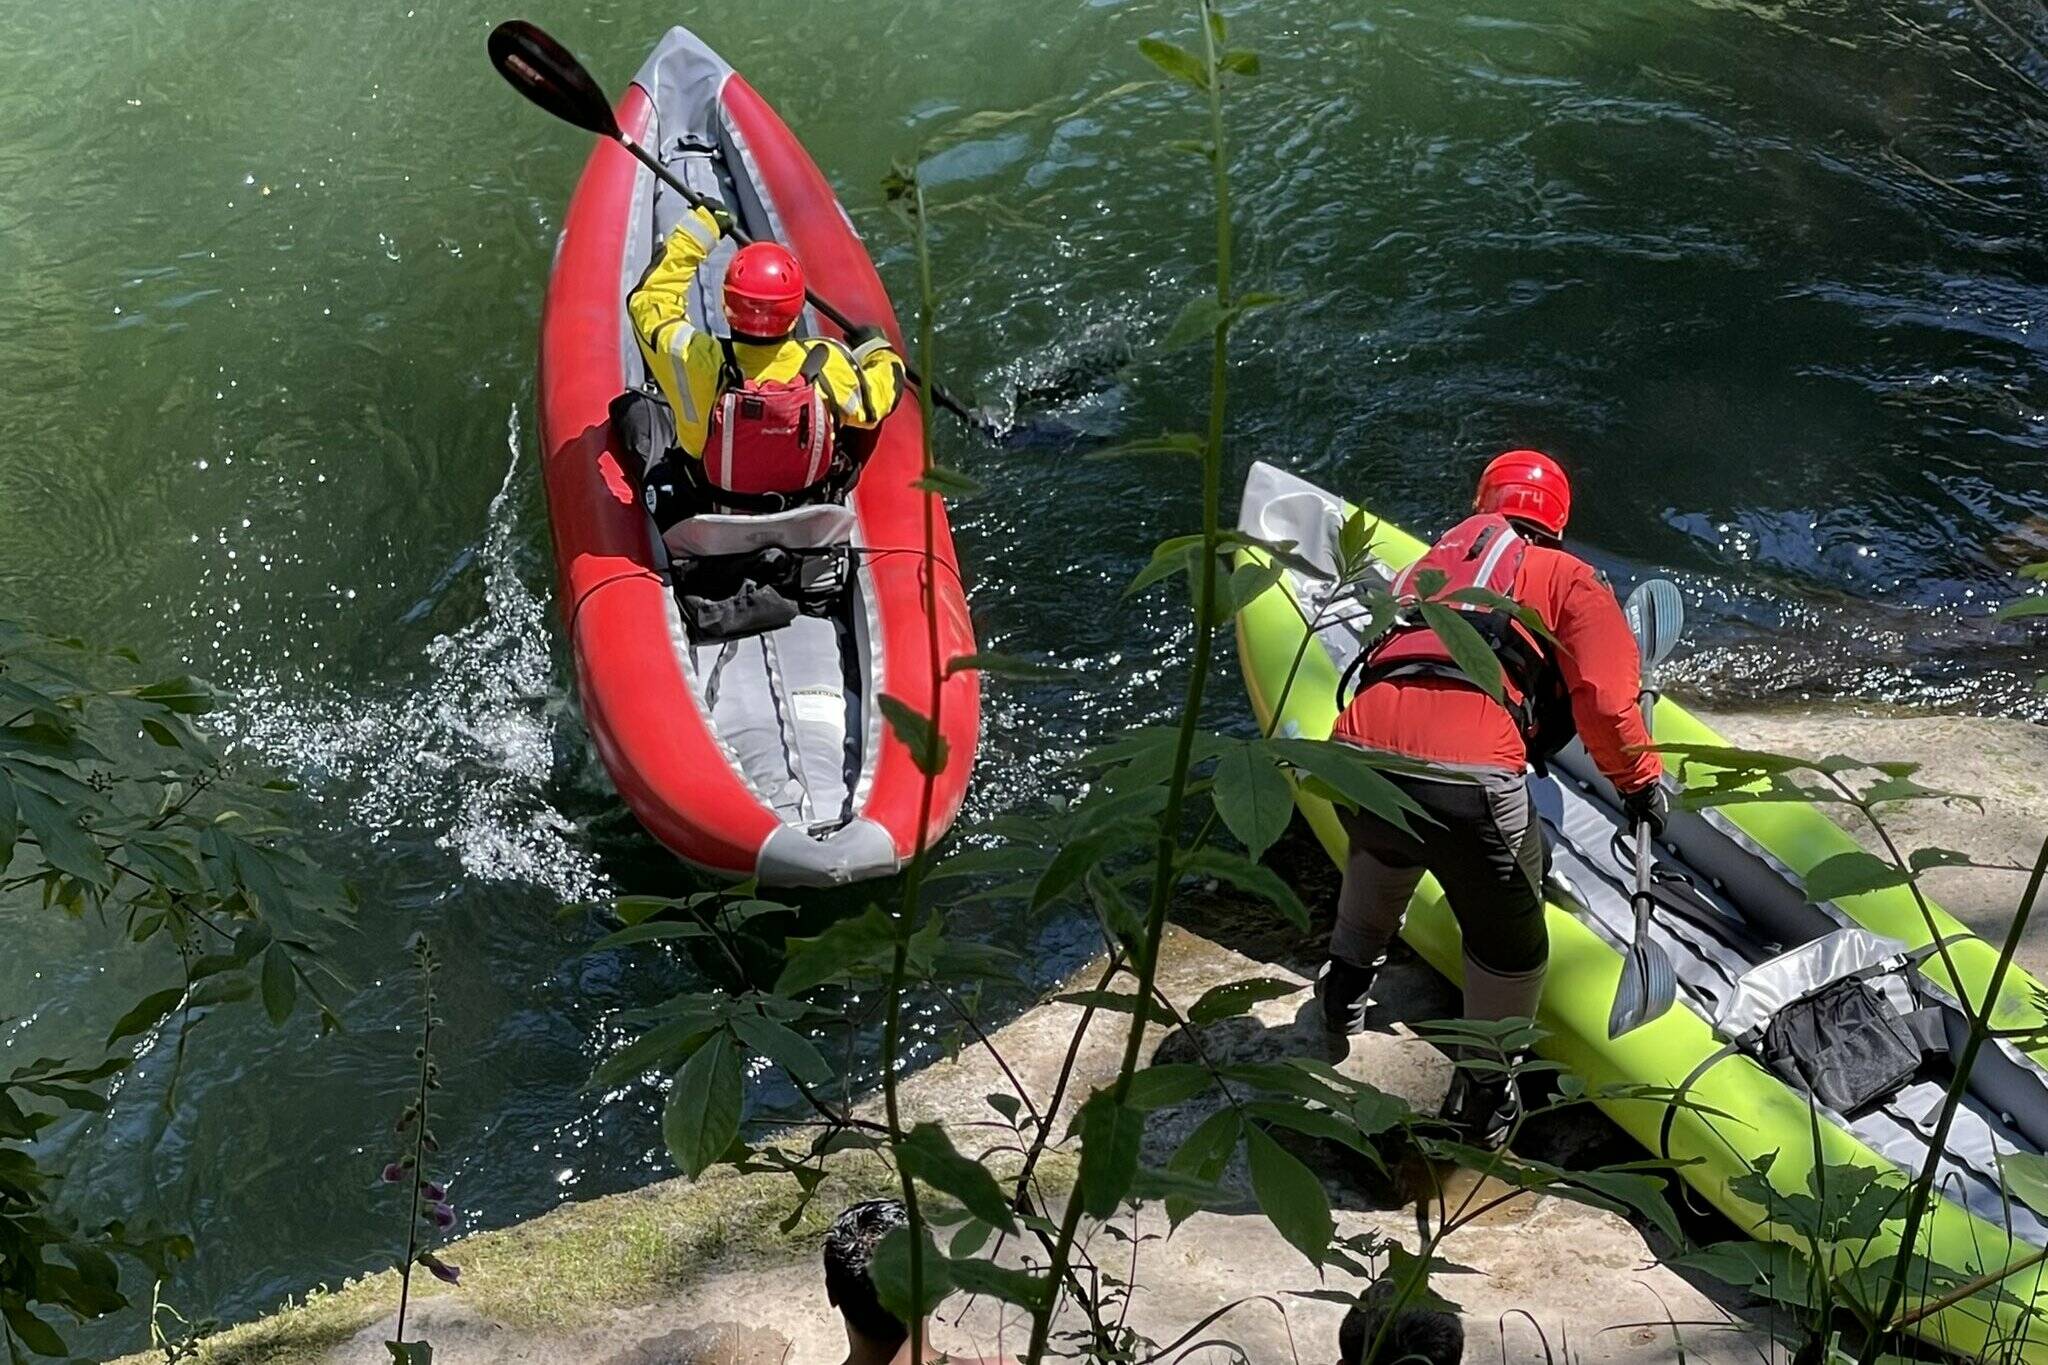 Photo from Puget Sound Fire via Twitter
Firefighters from Valley Regional Fire Authority use kayaks to search the Green River on Saturday afternoon for a missing swimmer. The search was unfortunately unsuccessful.